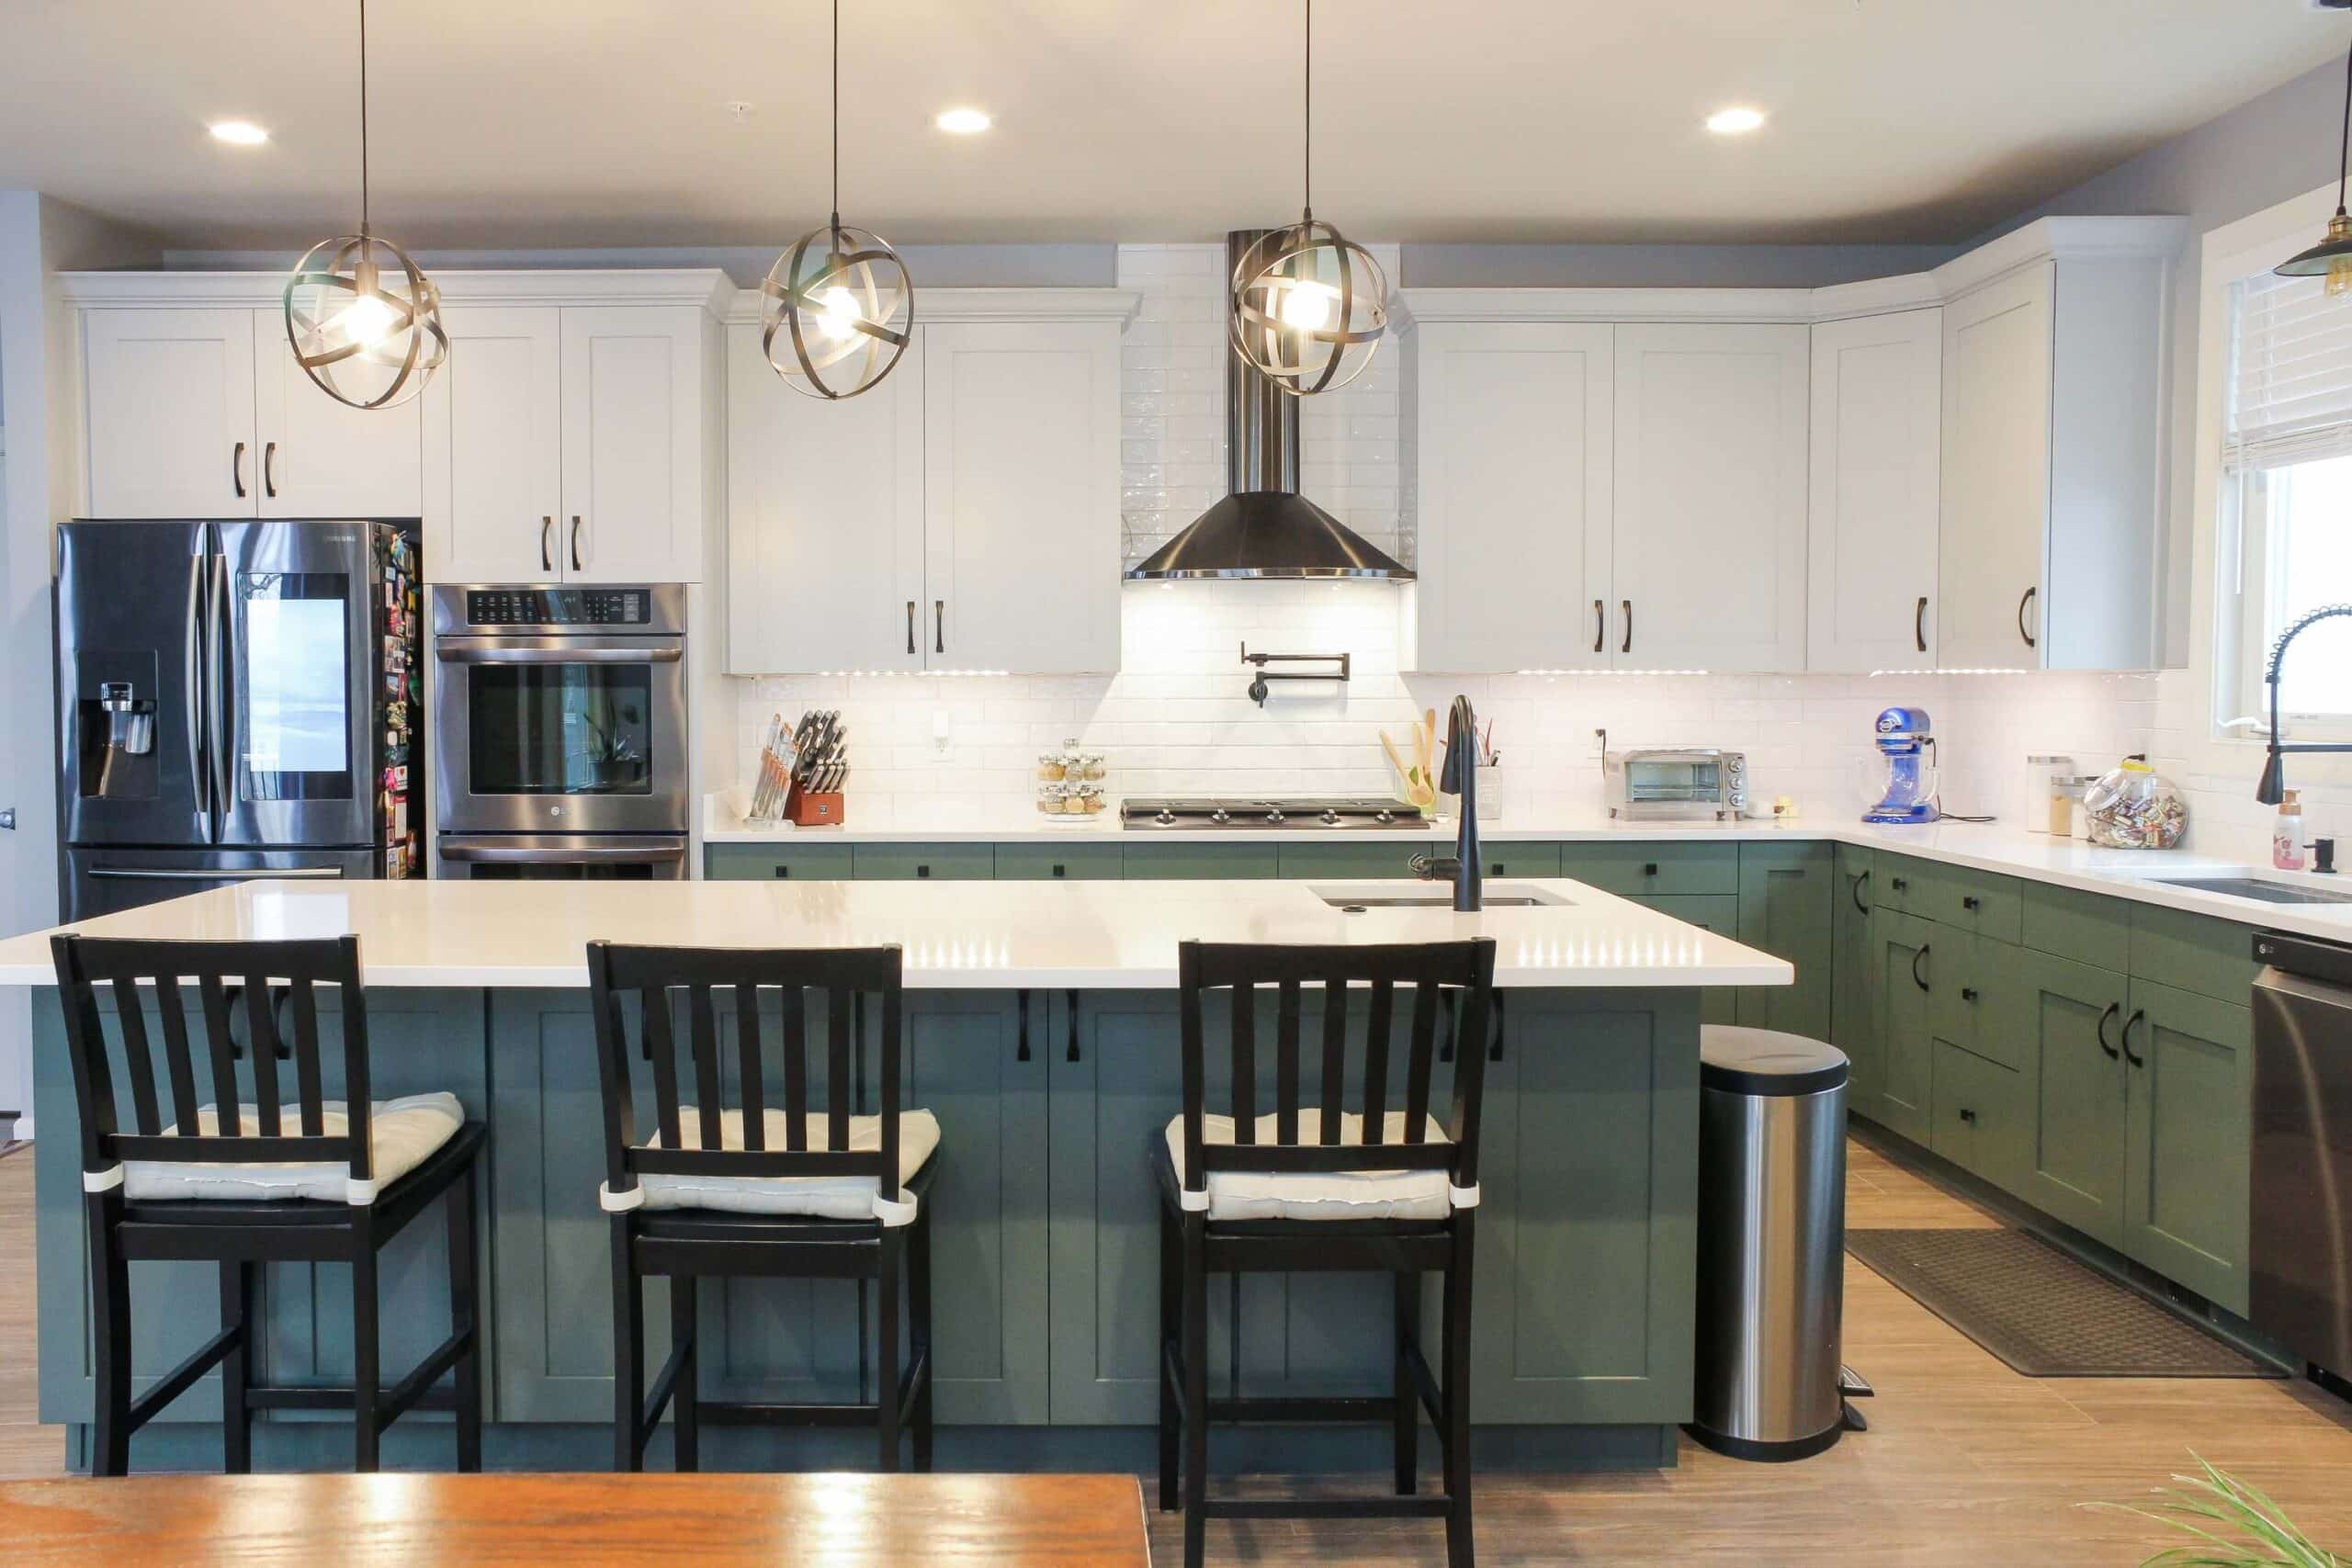 White and Green kitchen style with shaker cabinets